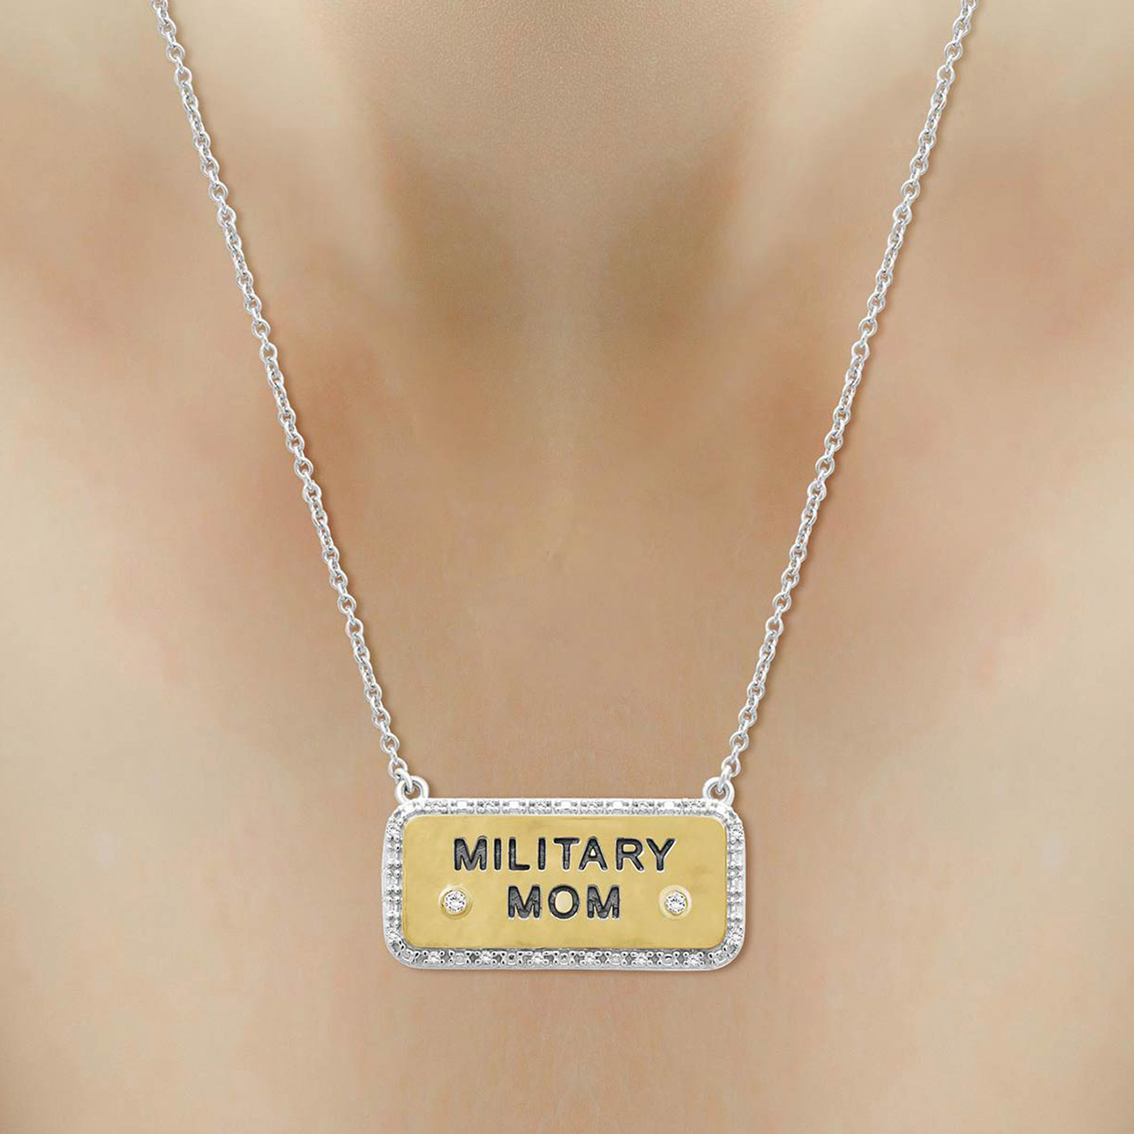 She Shines 14K Over Sterling Silver 1/10 CTW White Diamond Military Mom Necklace - Image 3 of 4